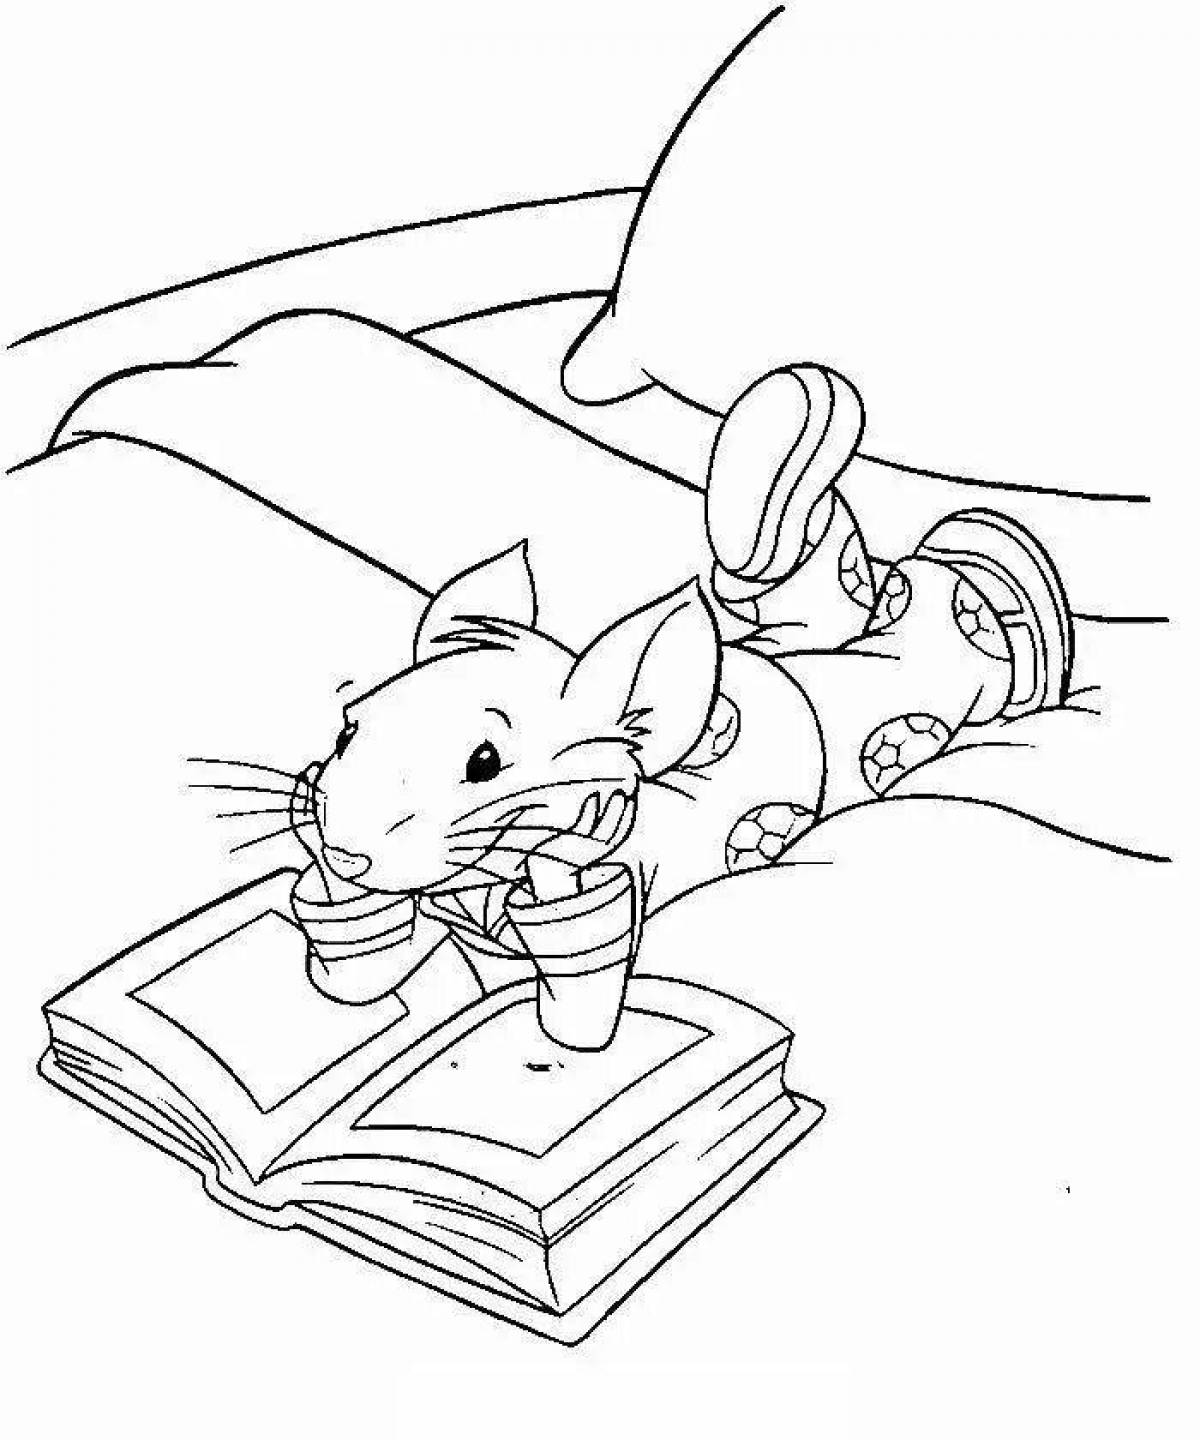 Coloring playful mouse tim